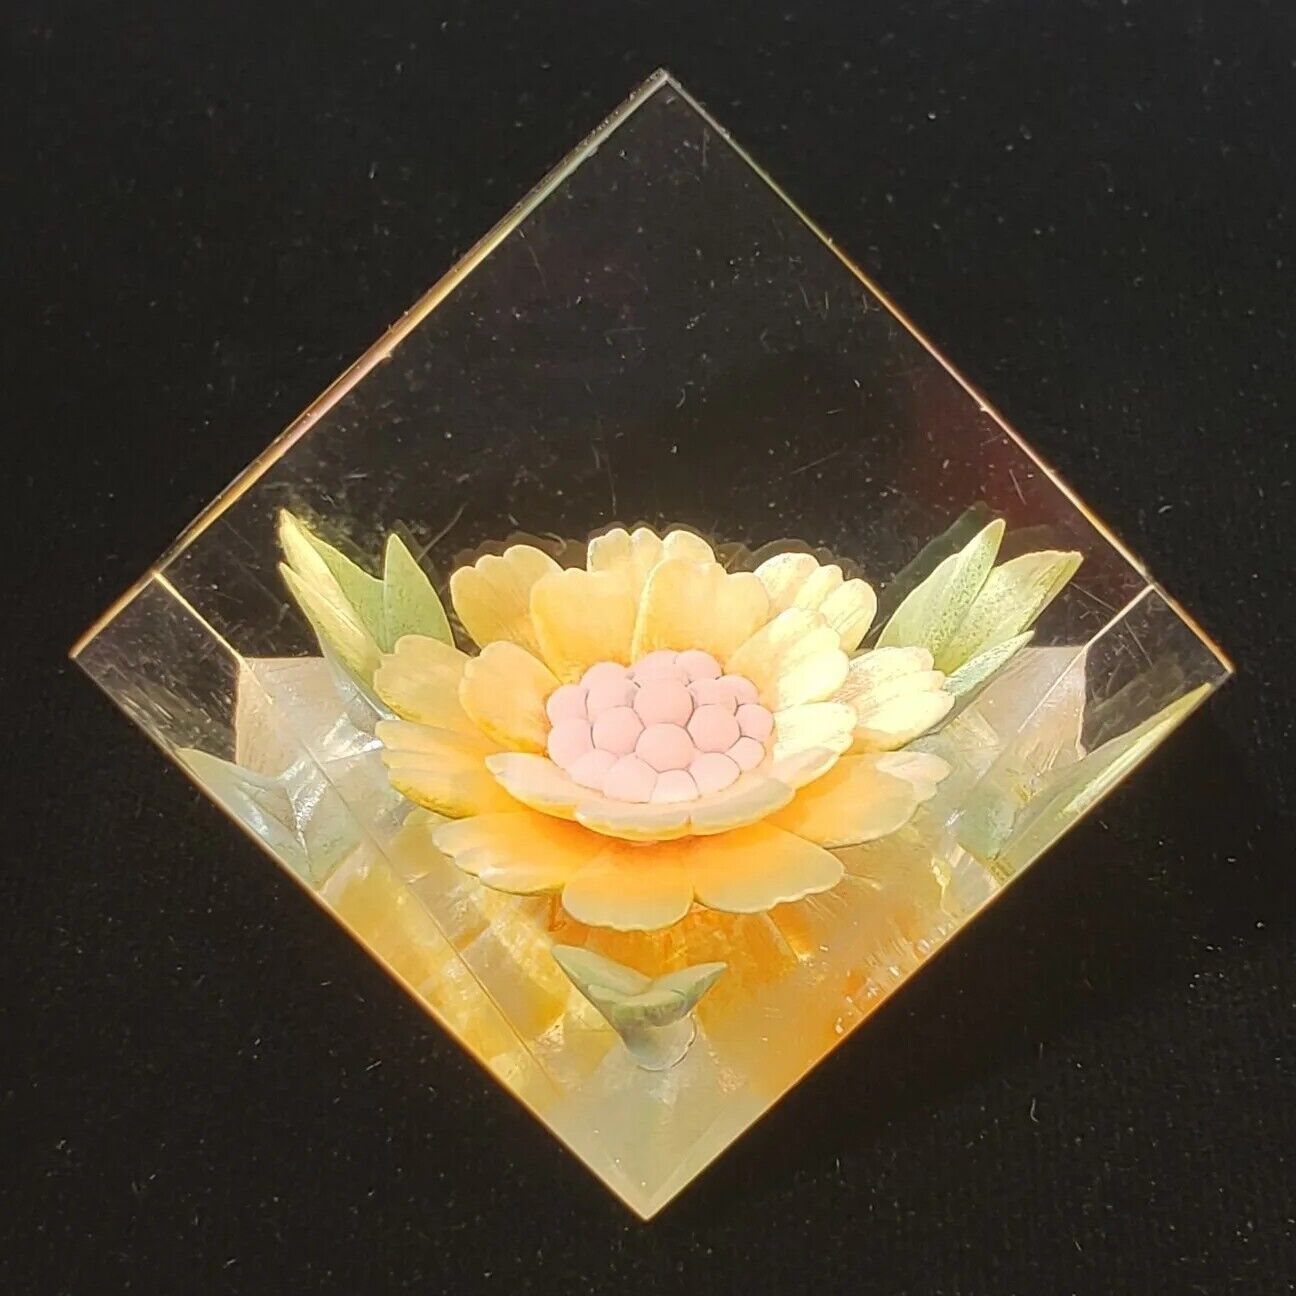 Vintage Russ Clear Lucite Acrylic Yellow Daisy Flower Mini Paperweight Geometric